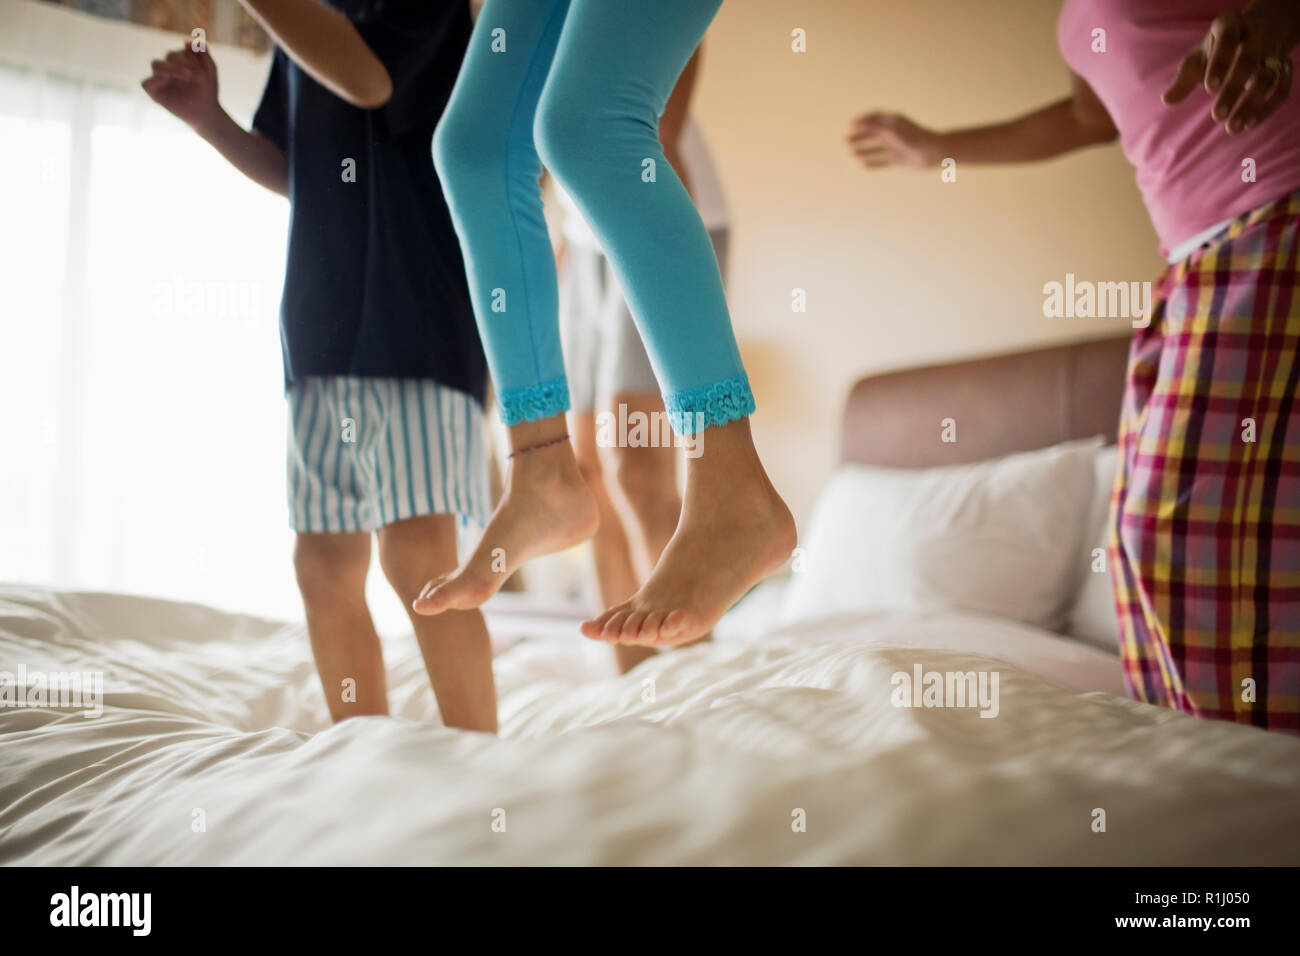 Family jumping on bed together Stock Photo